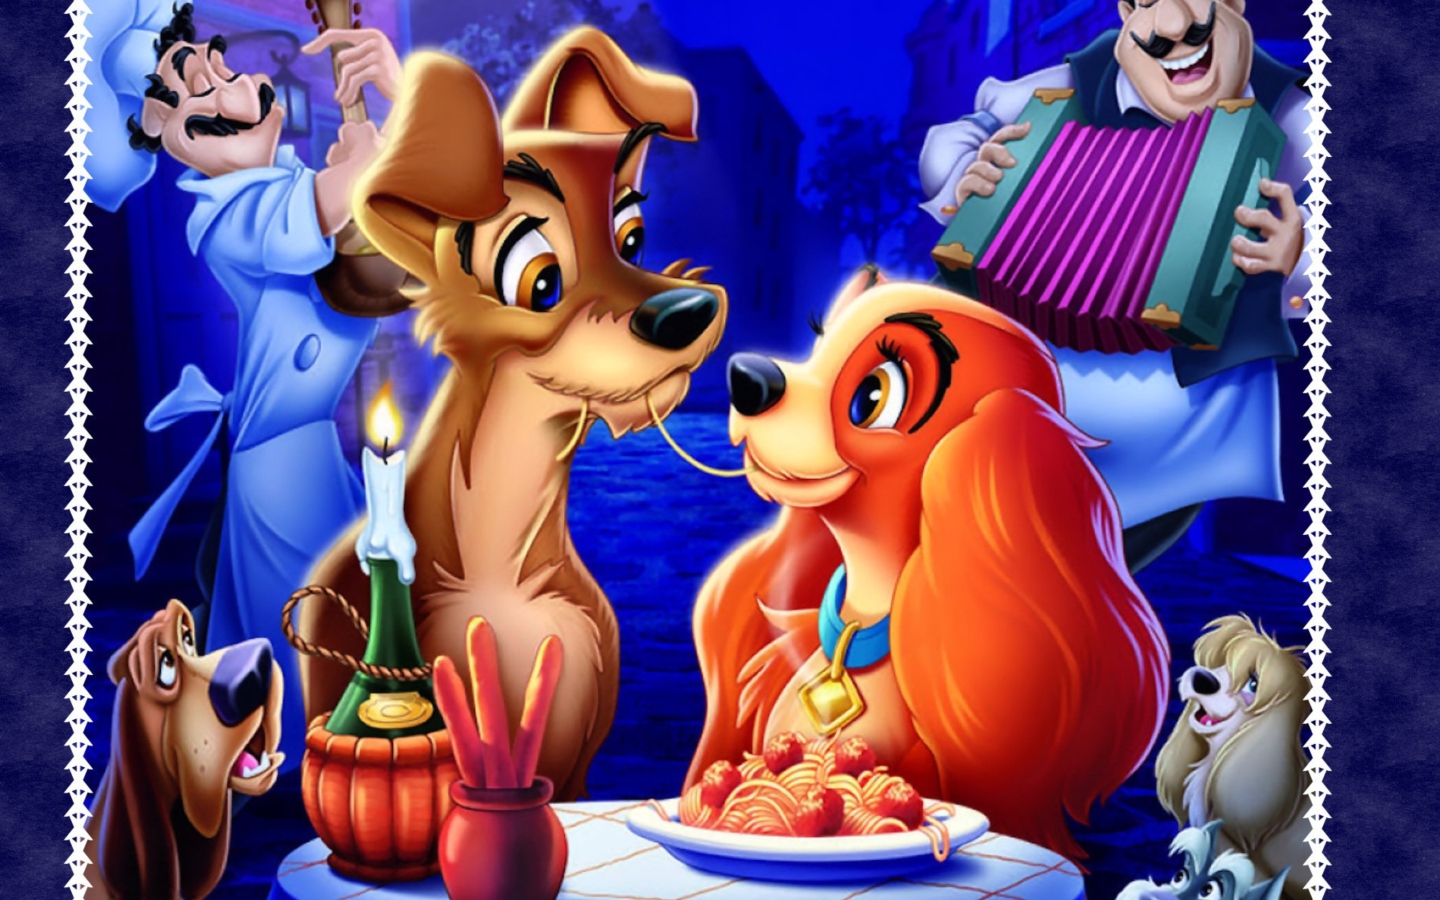 Lady And The Tramp wallpaper 1440x900